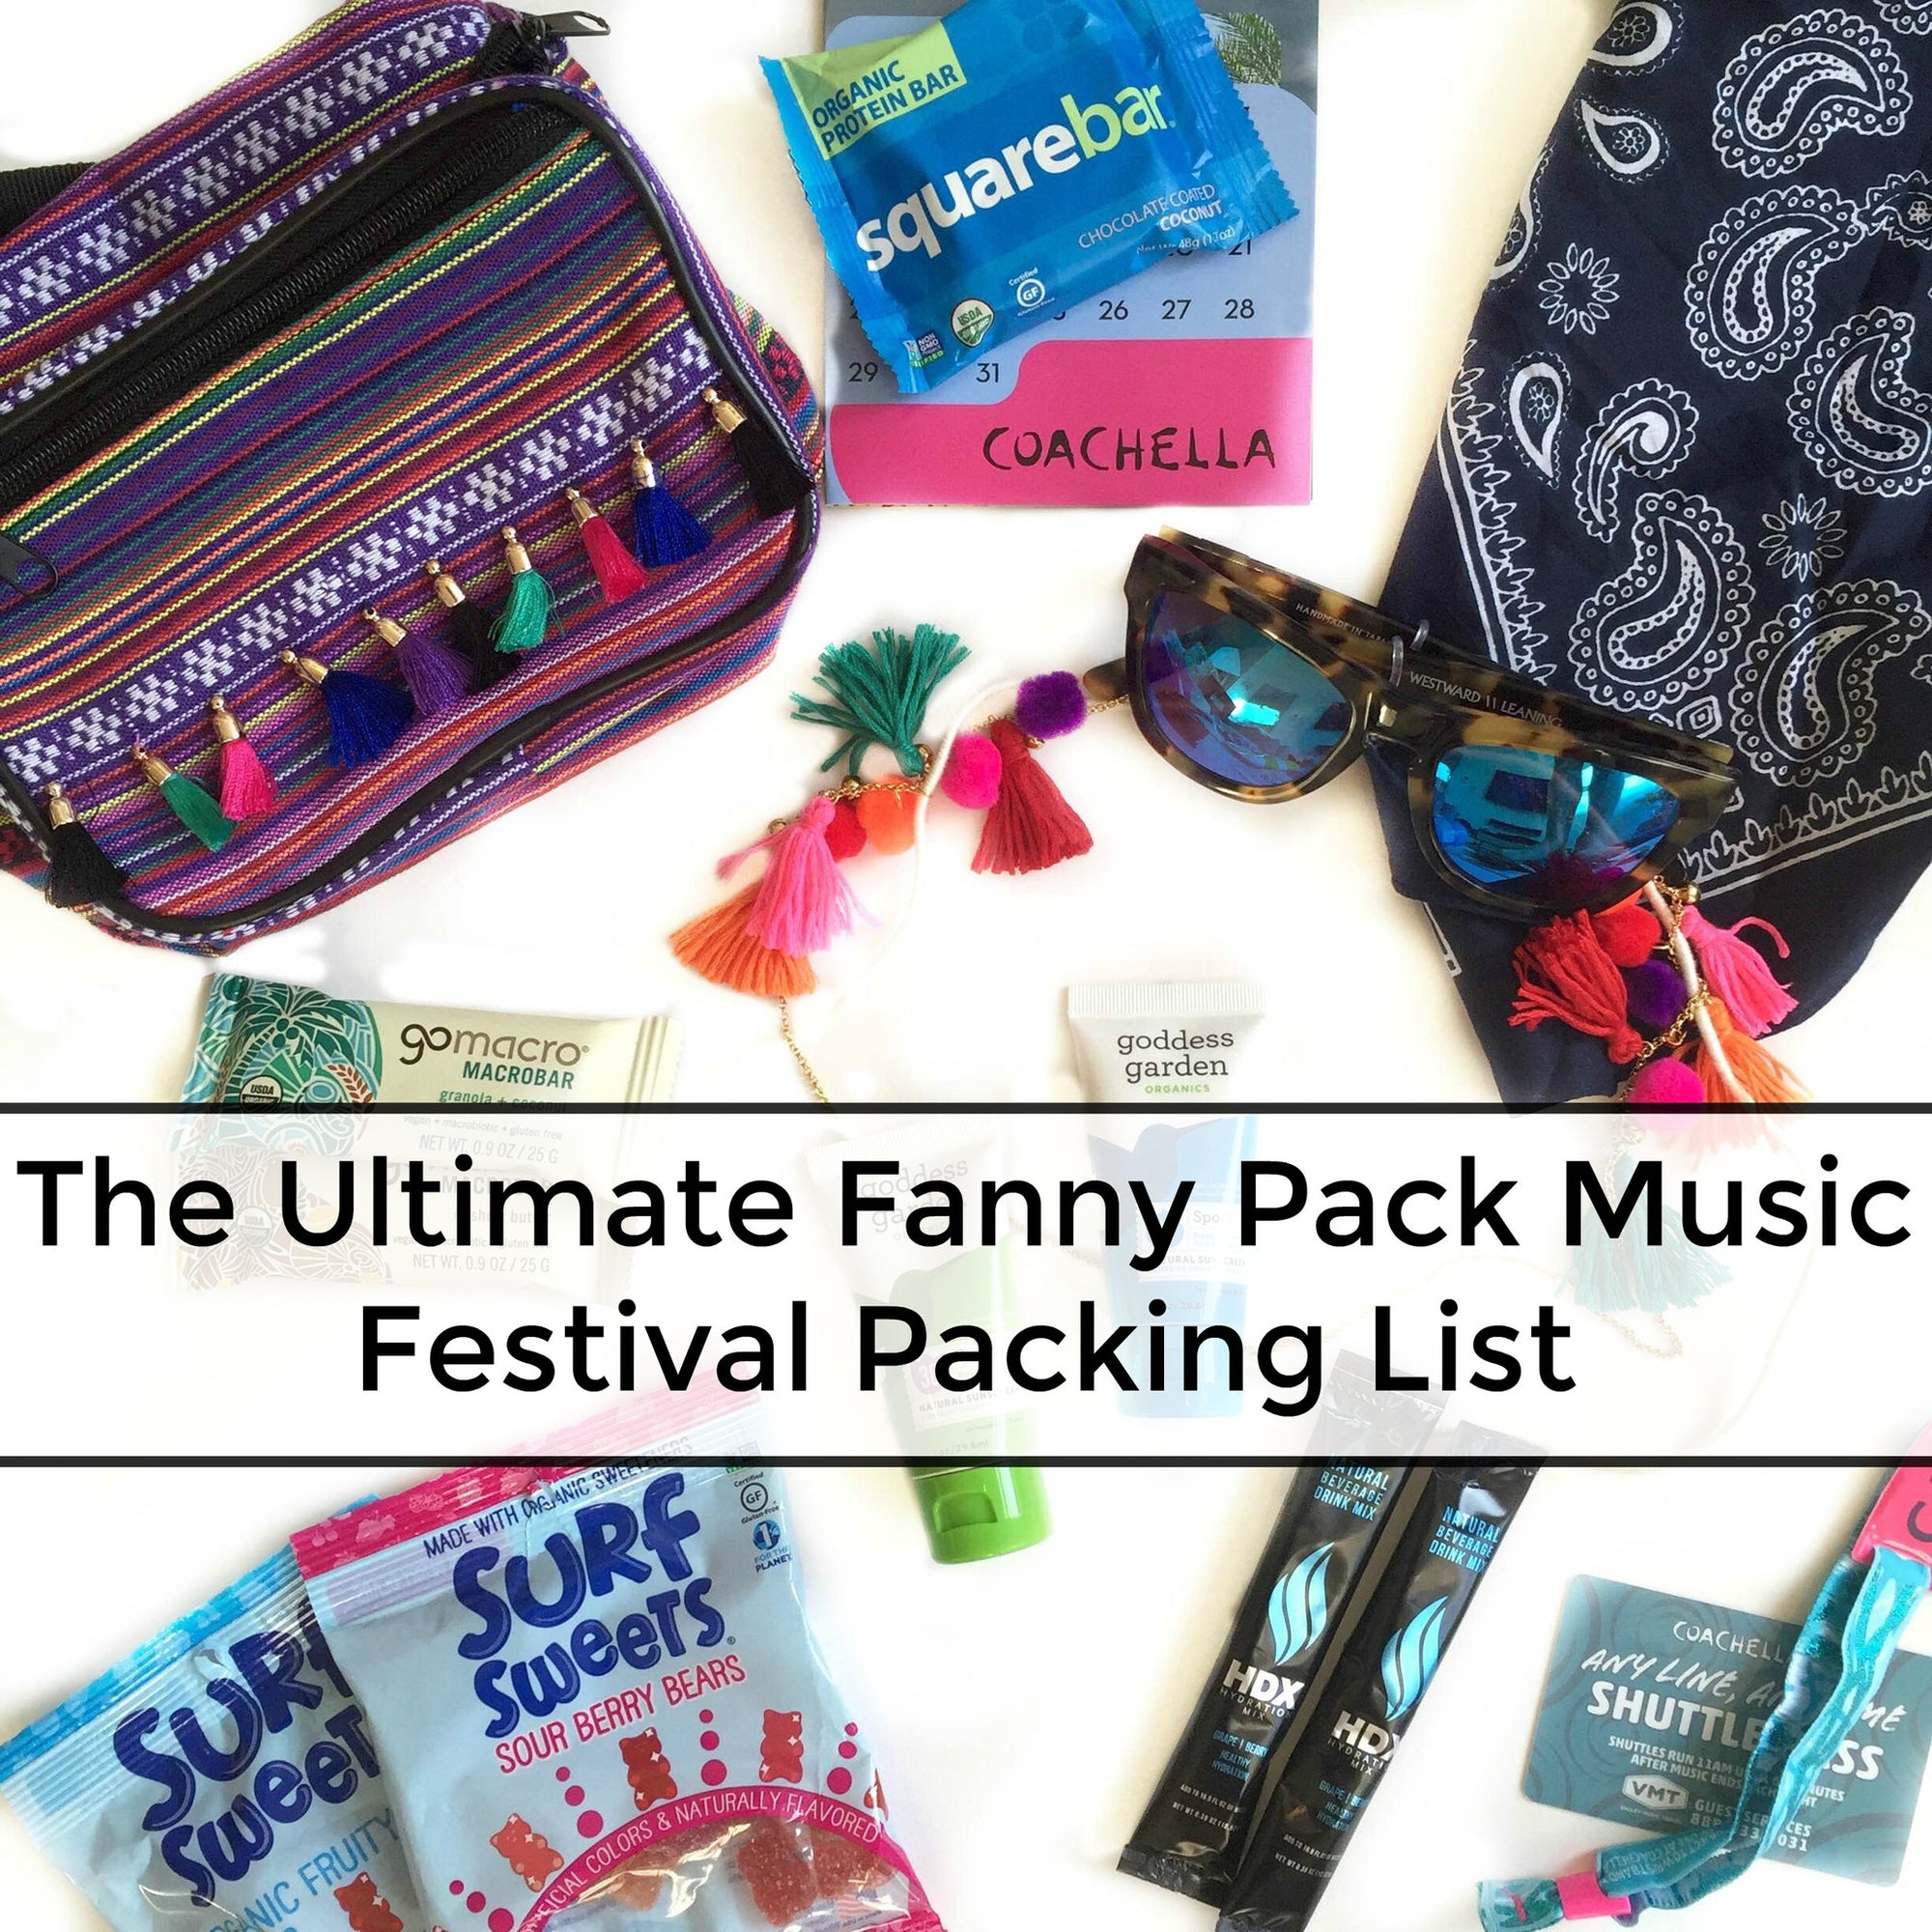 The Ultimate Fanny Pack Festival Packing List